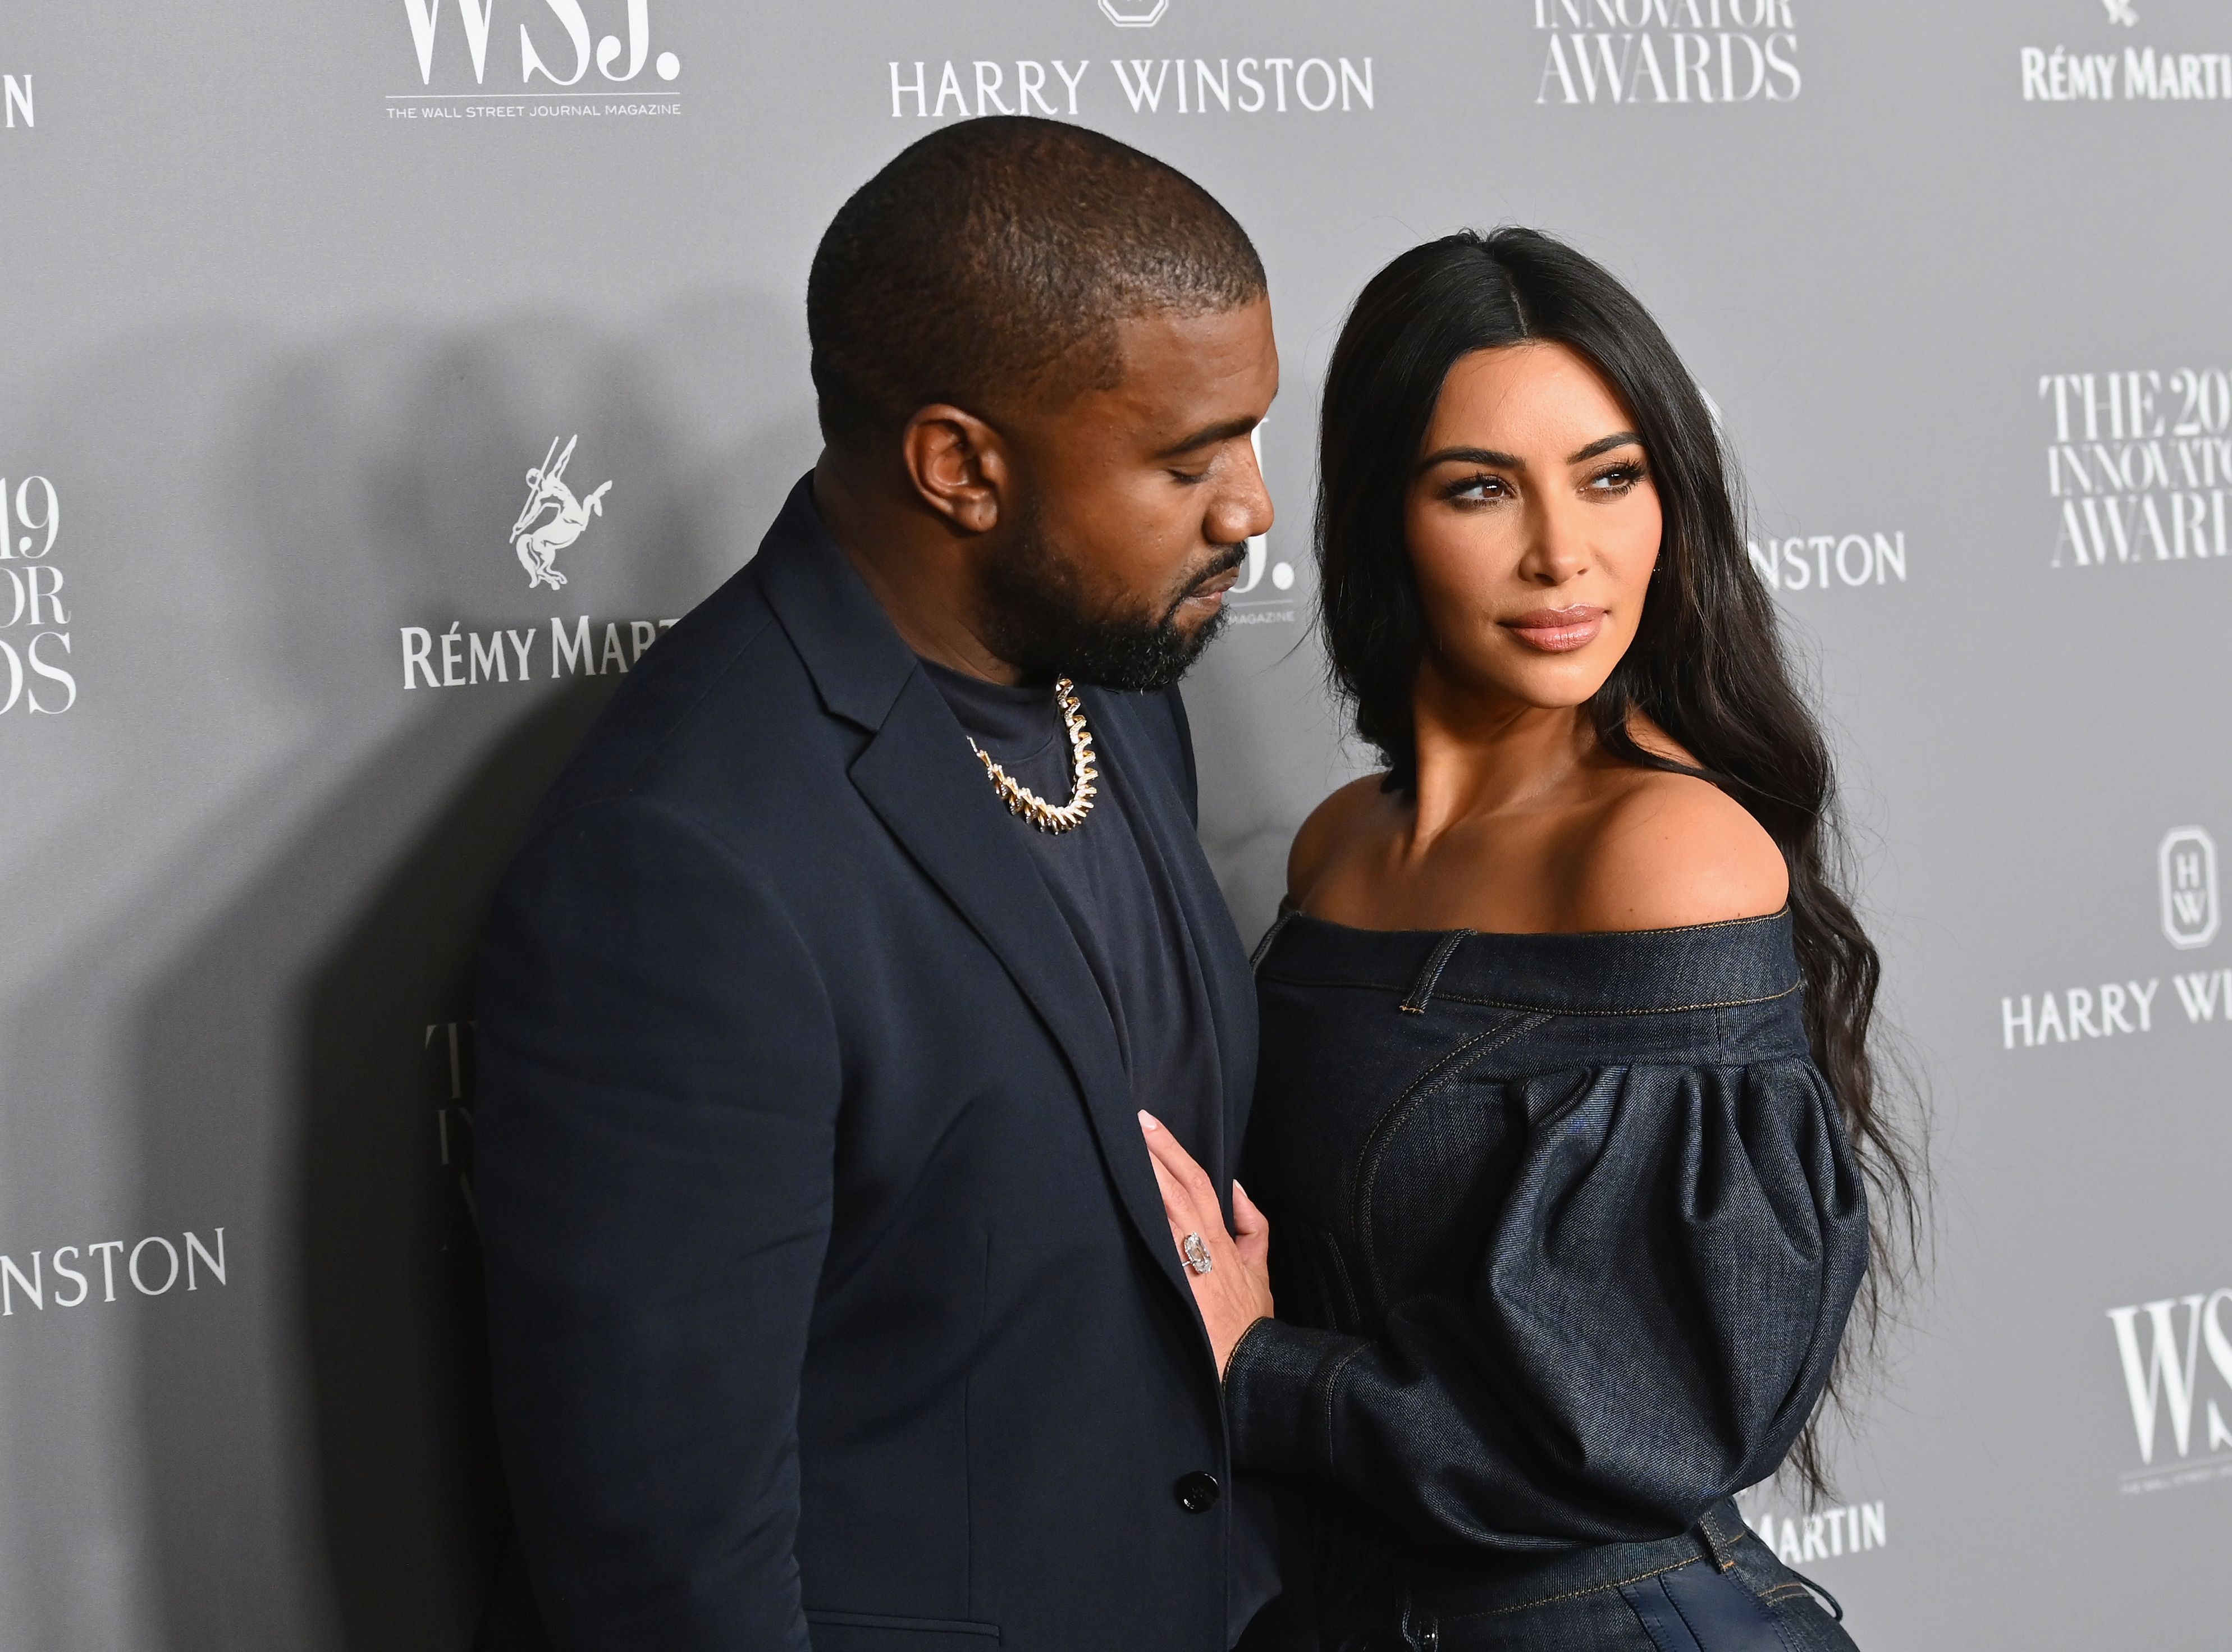 Sources recently revealed Kim- who was previously married to Kanye West- kept the new relationship quiet due to not wanting to appear as a 'homewrecker'